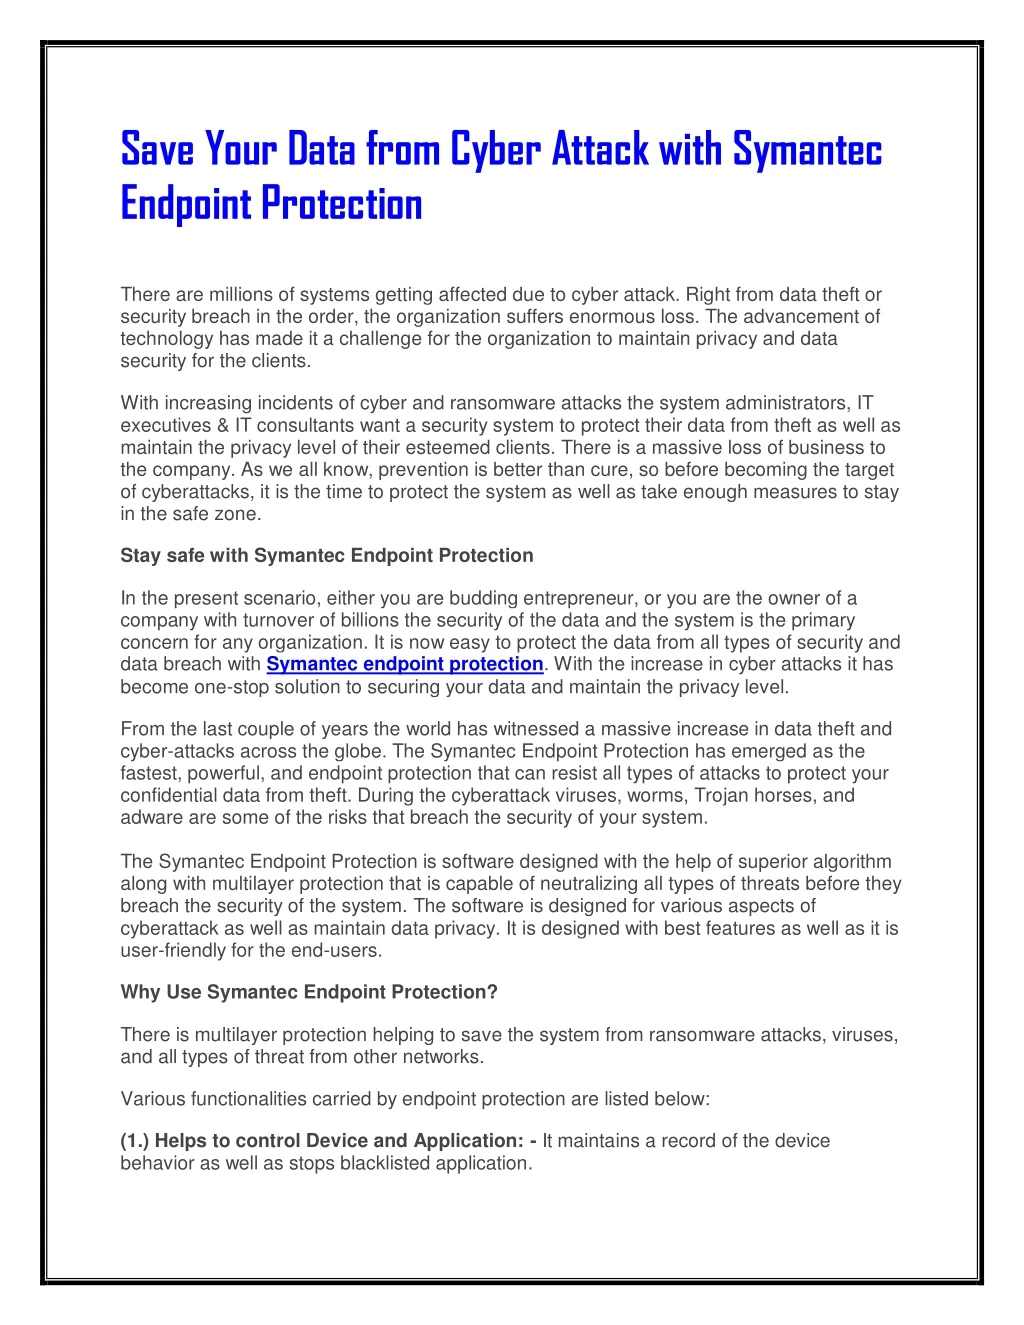 save your data from cyber attack with symantec